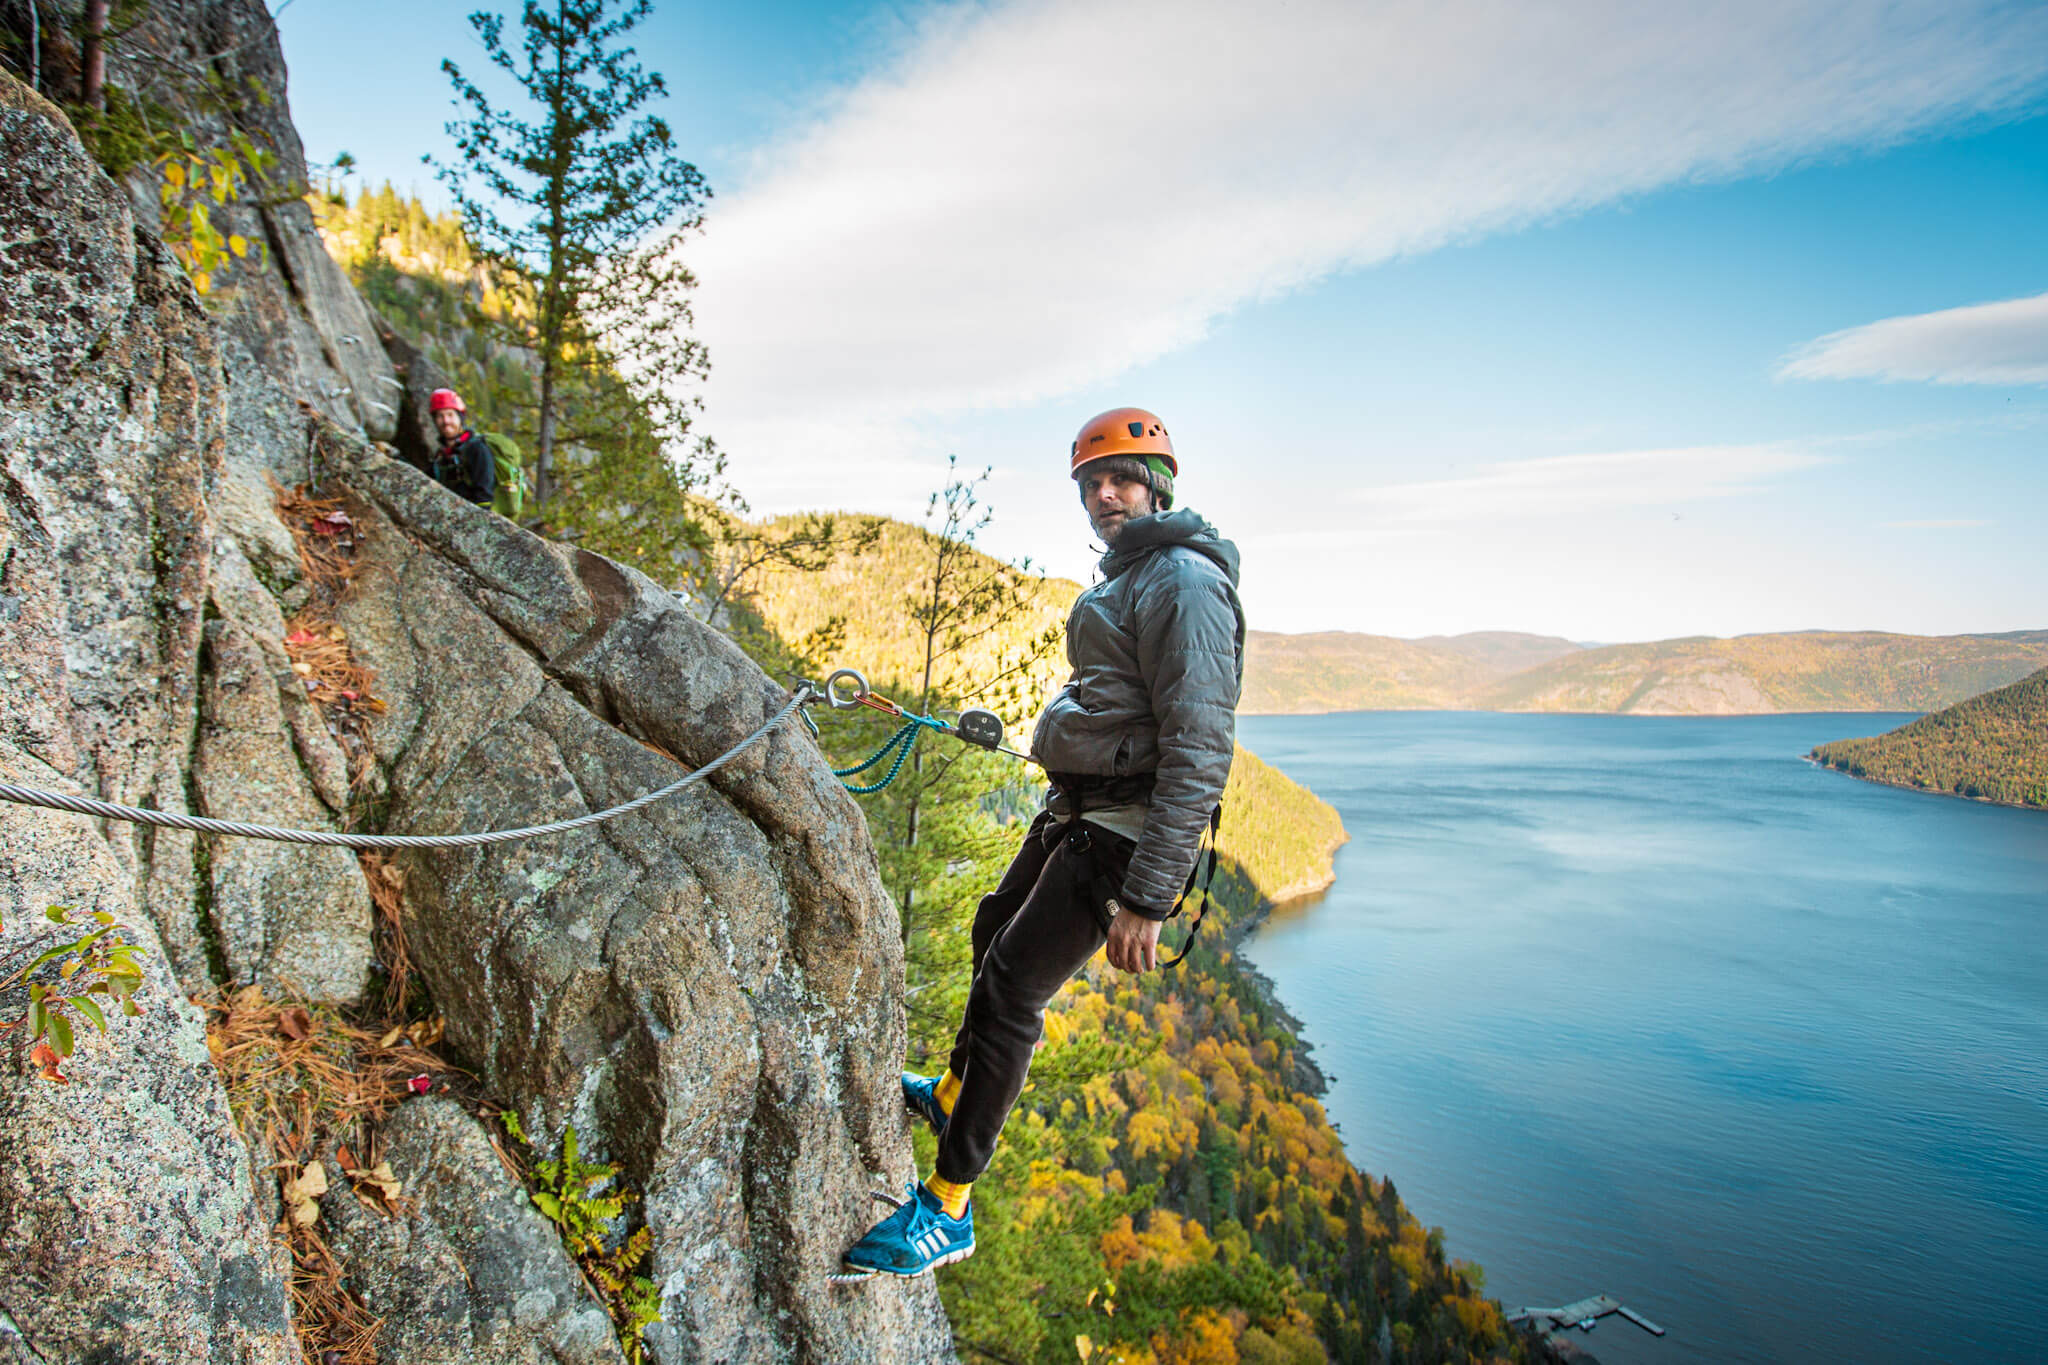 A rock climber hangs by his harness on a rock cliff in the Saguenay Fjord National Park